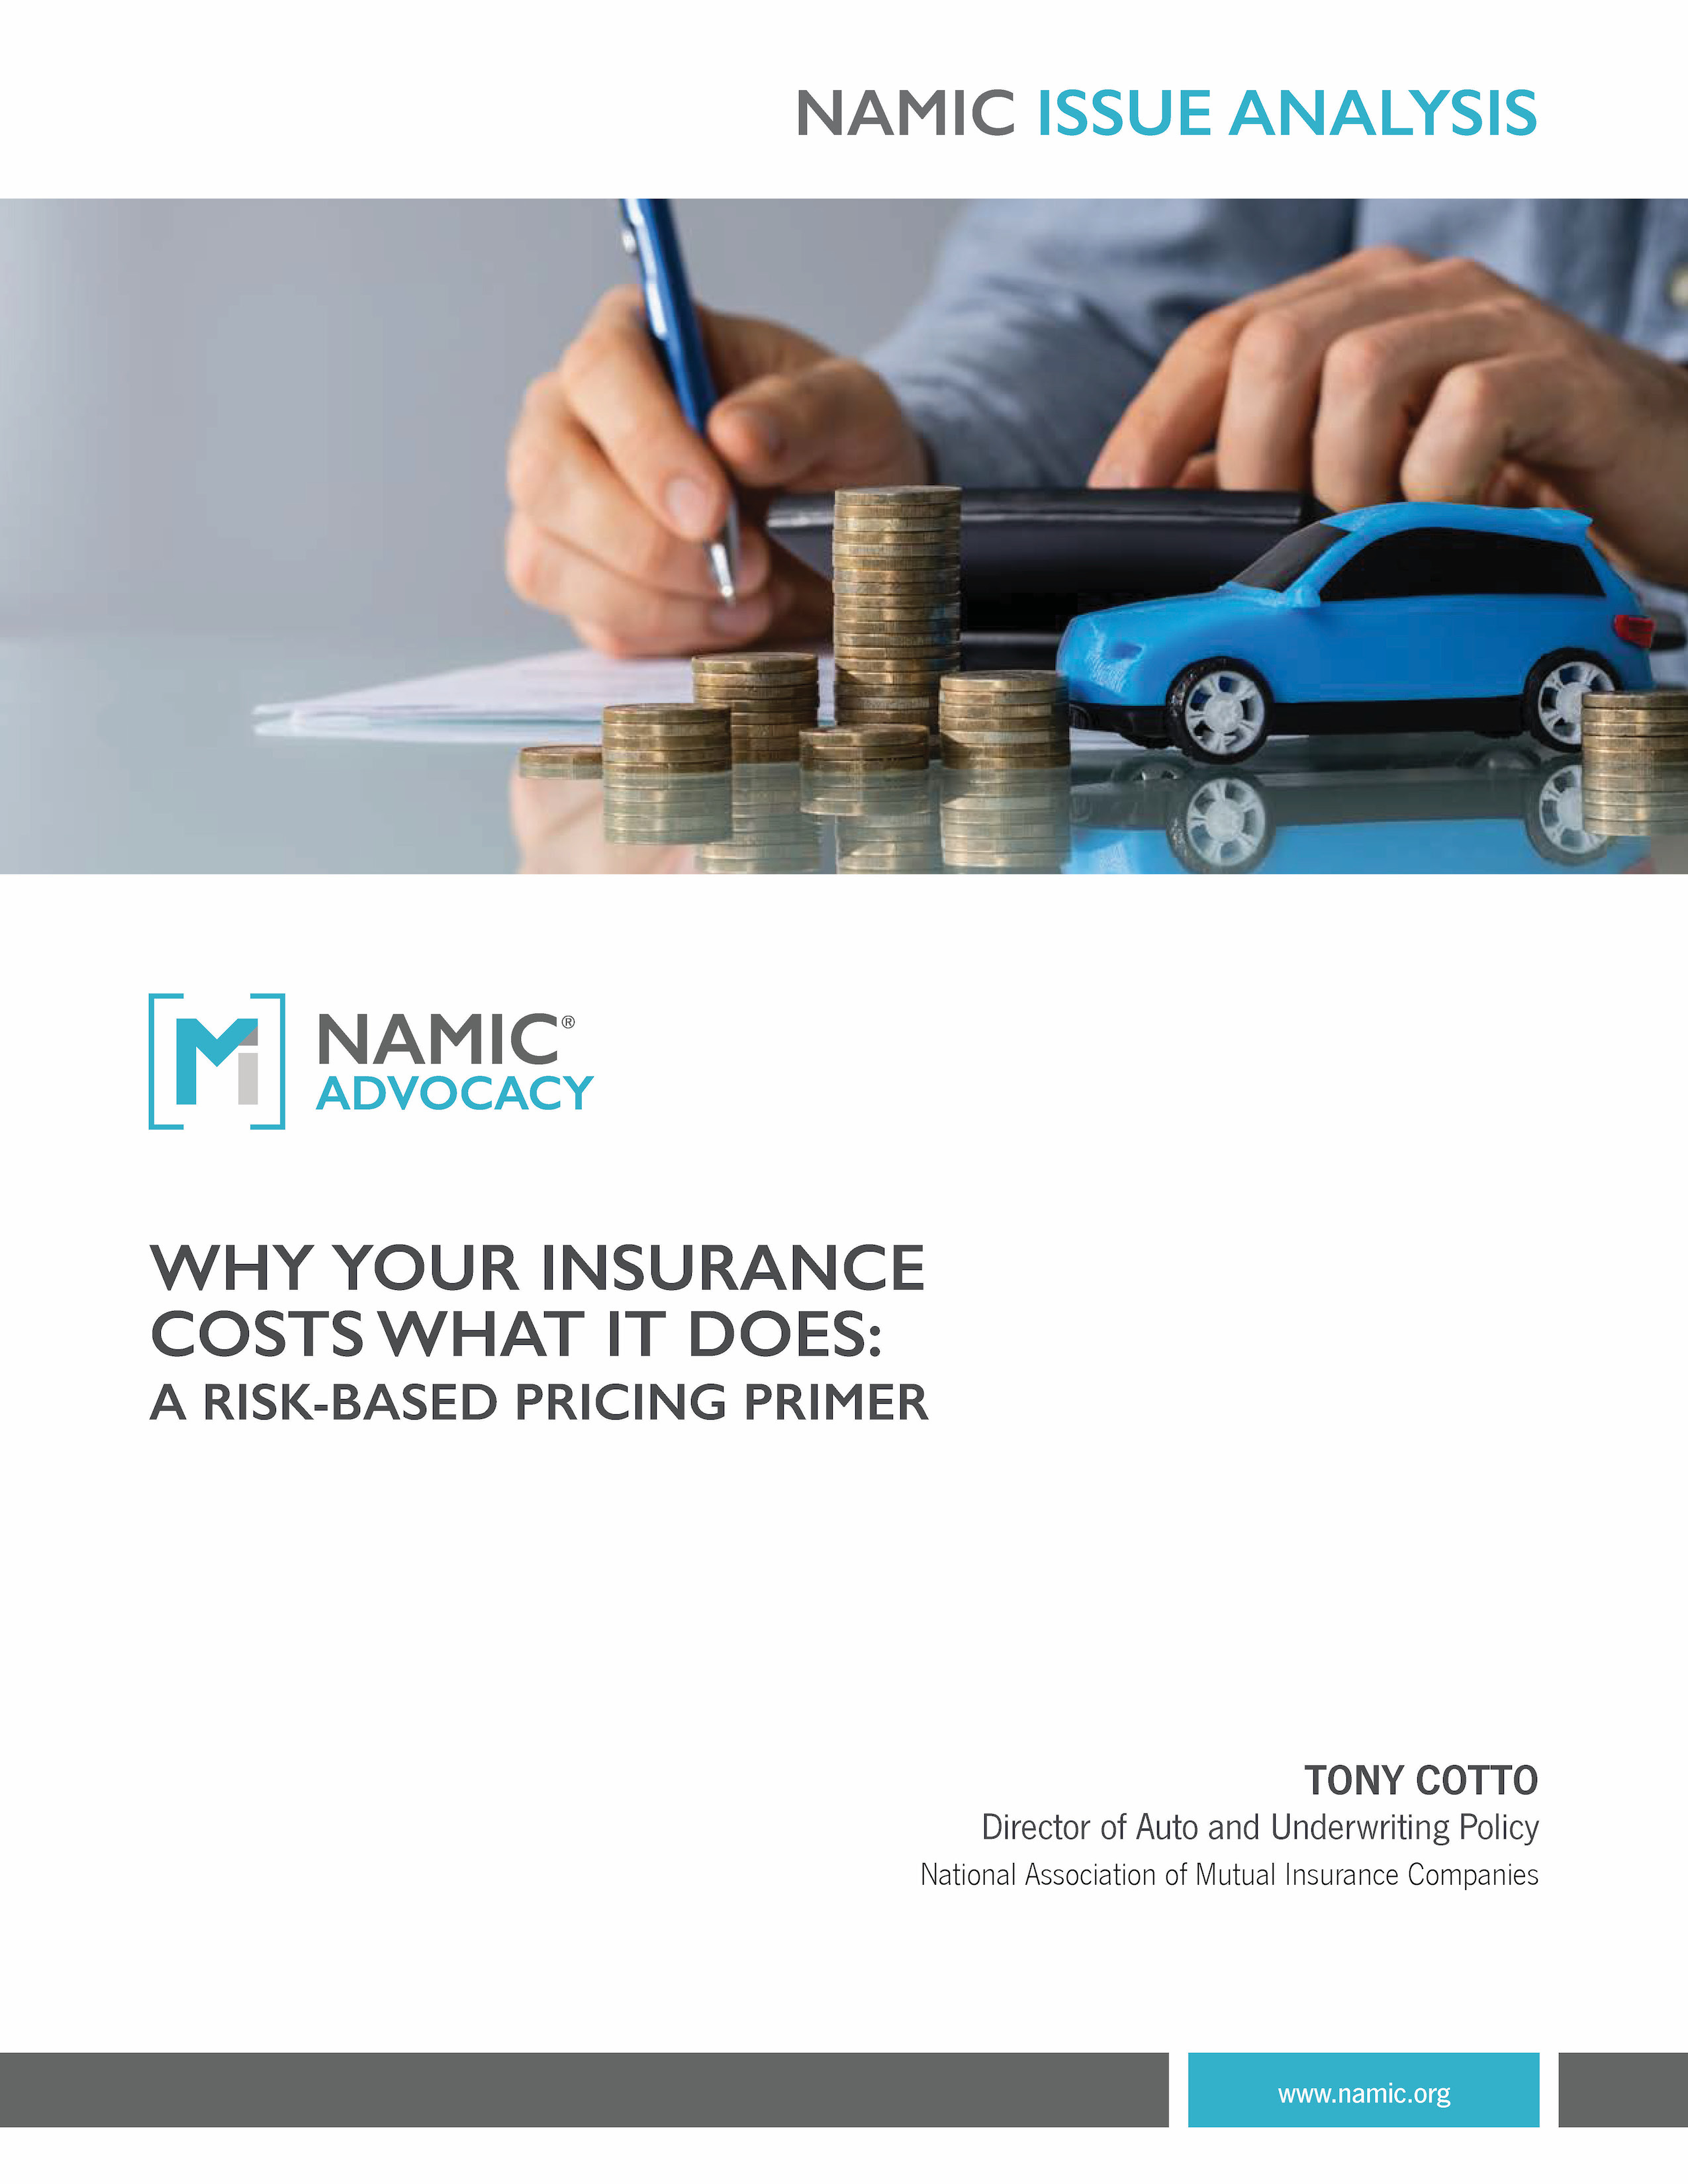 Why Your Insurance Costs What It Does: A Risk-Based Pricing Primer PDF